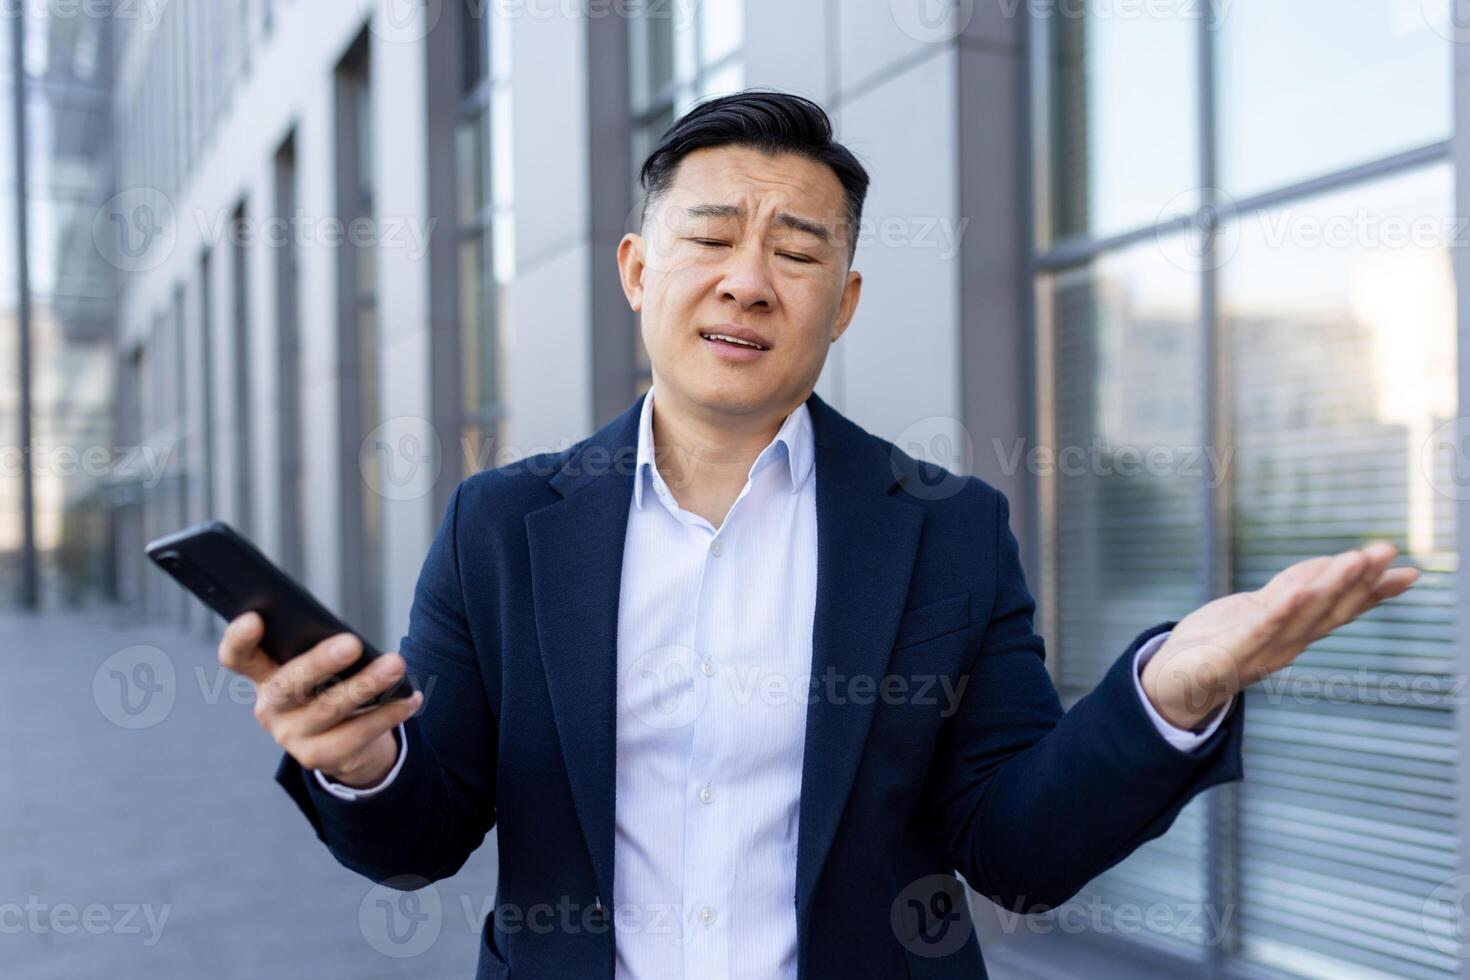 Close-up photo of an upset young Asian male businessman standing in a suit outside an office building, holding a phone and waving his hands in frustration.